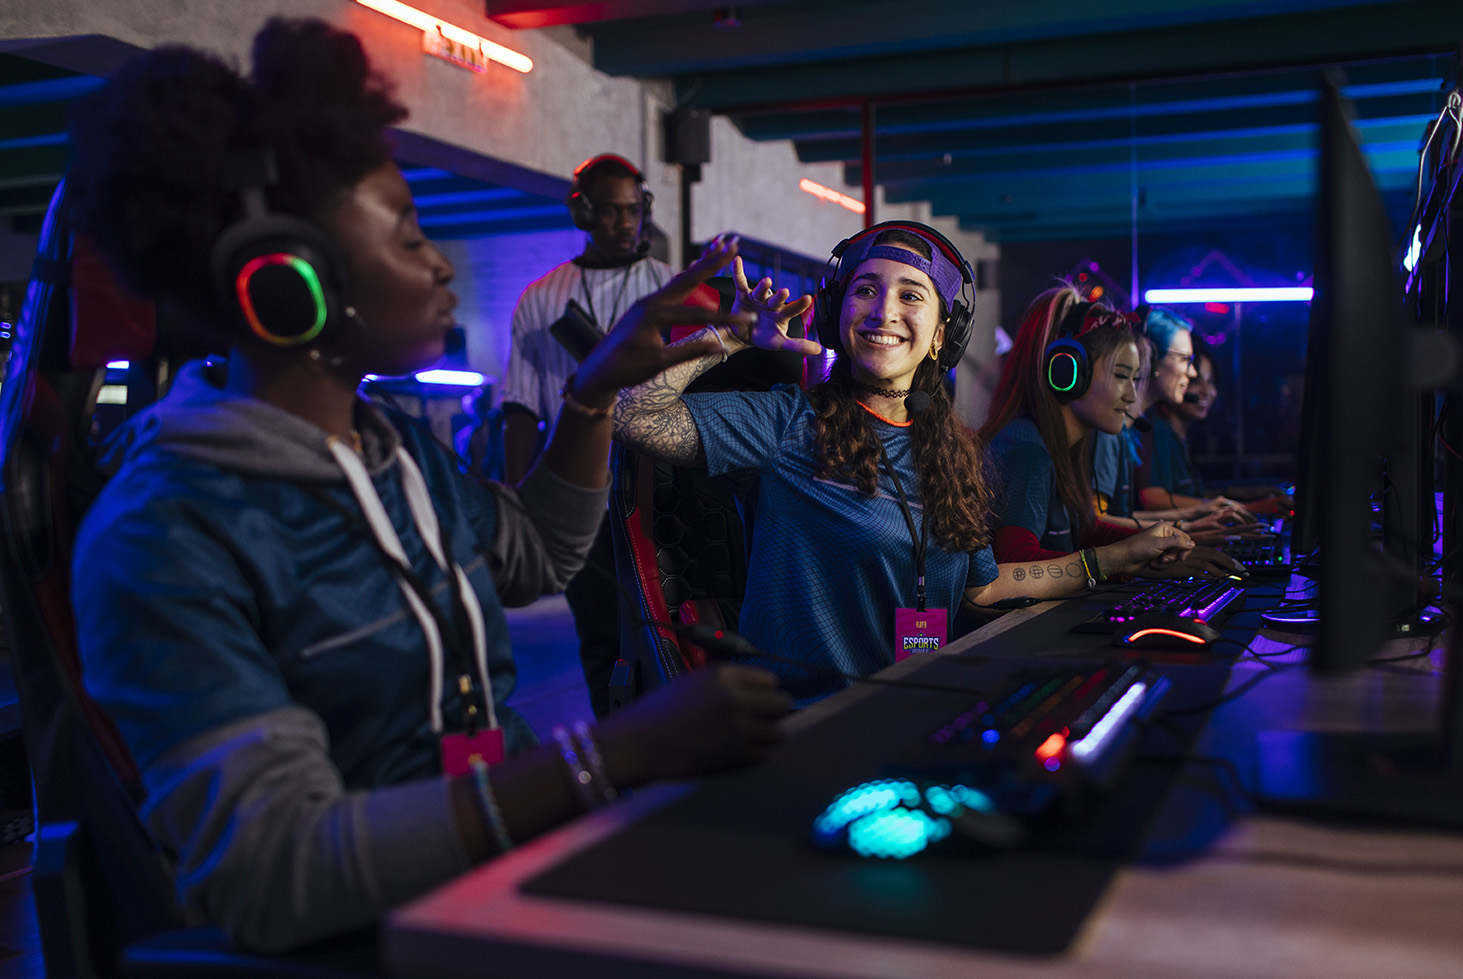 Two female gamers used hand gestures to win an esports game